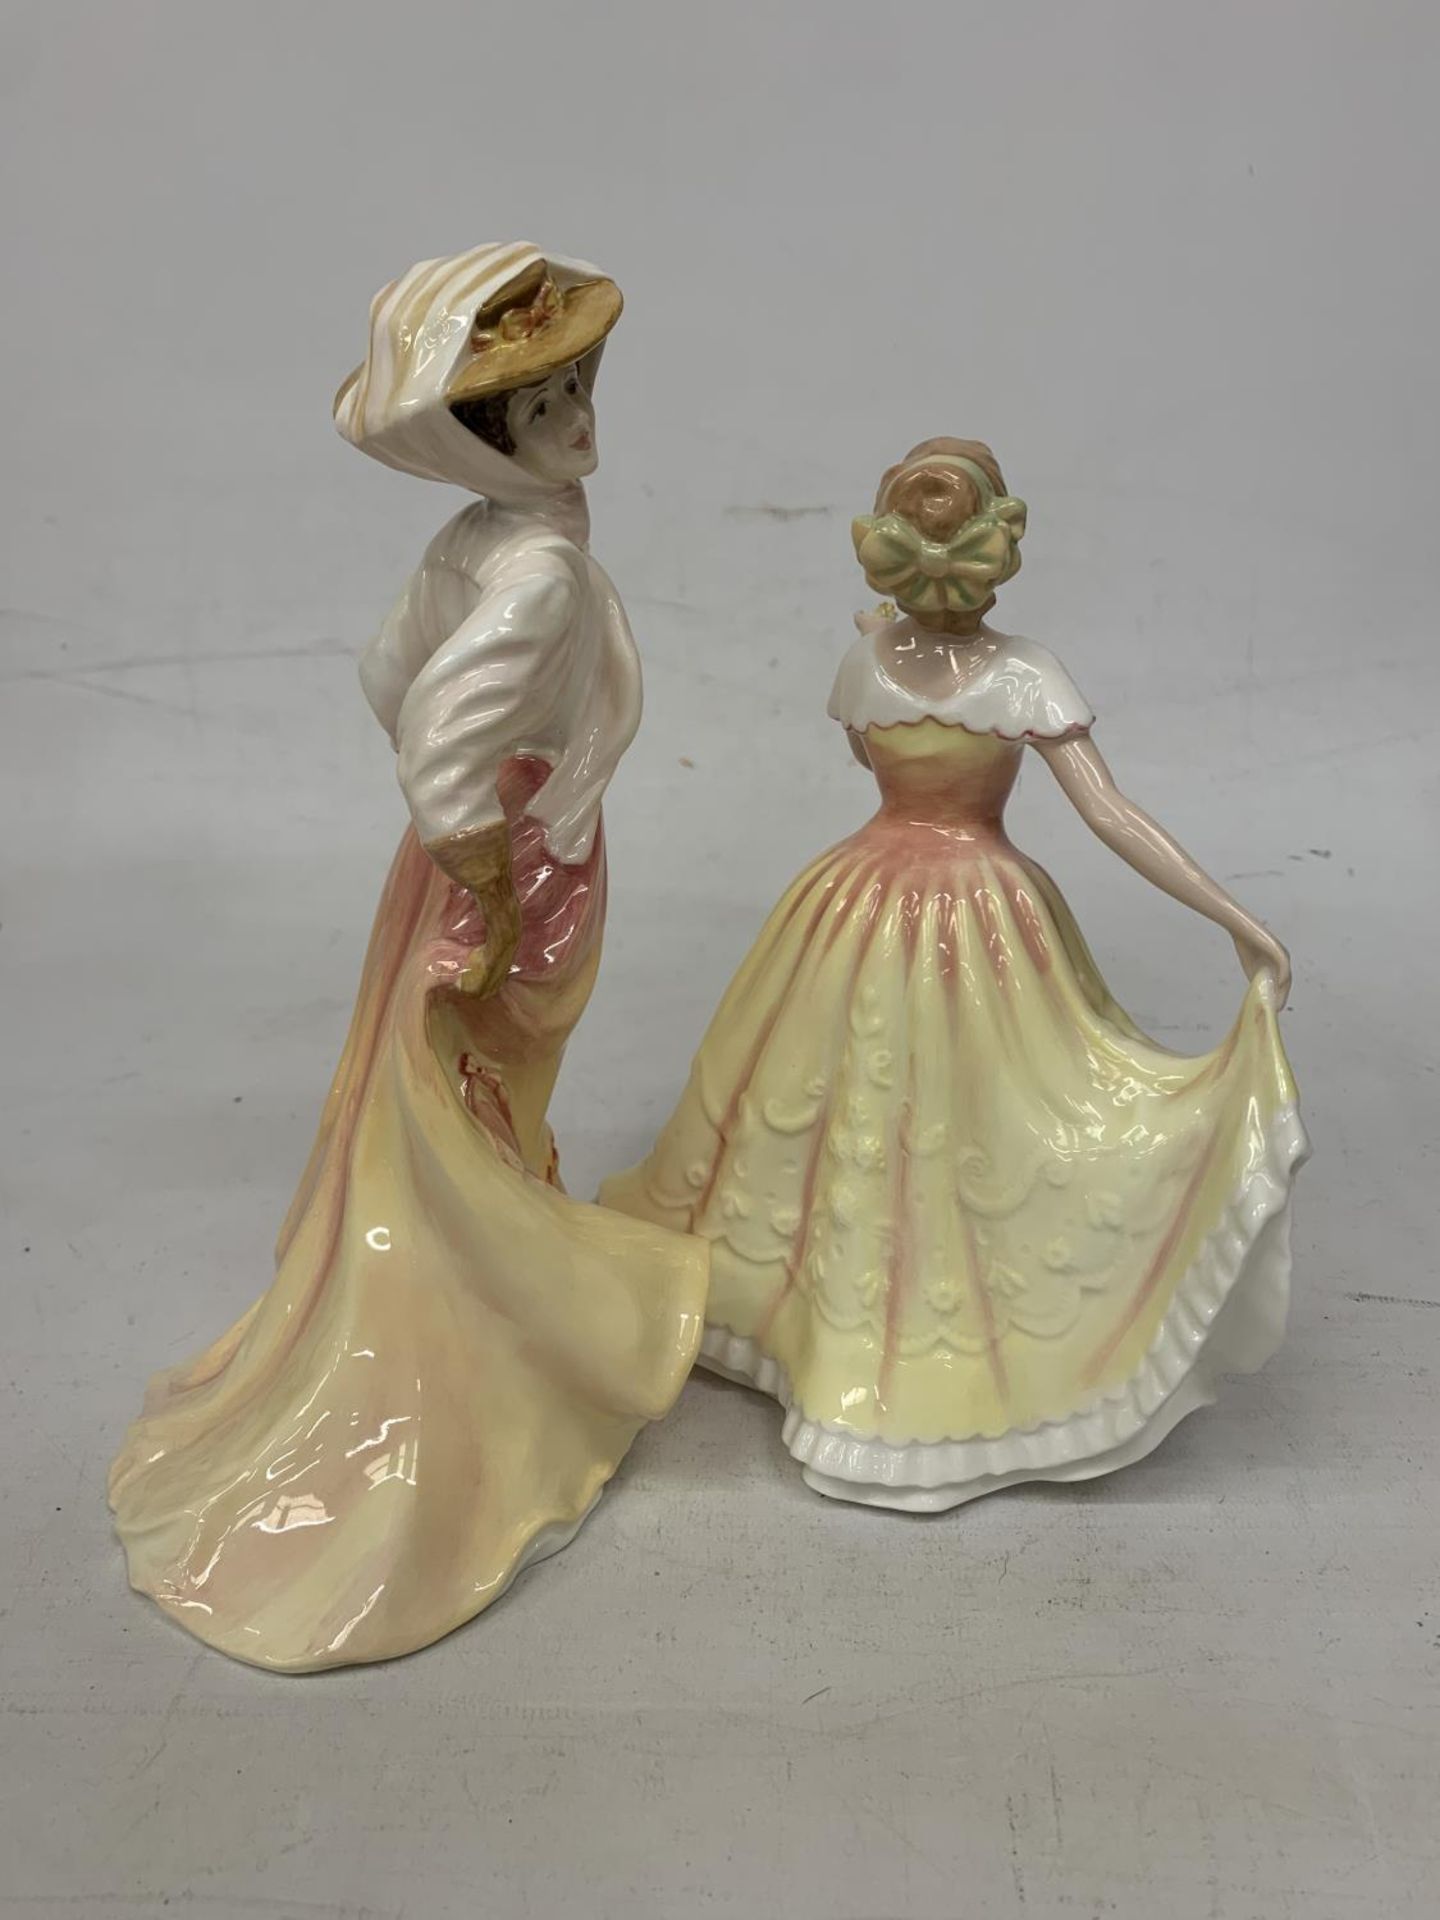 TWO ROYAL DOULTON FIGURES "THE OPEN ROAD" HN 4161 AND FIGURE OF THE YEAR " DEBORAH" HN 3644 - Image 2 of 4